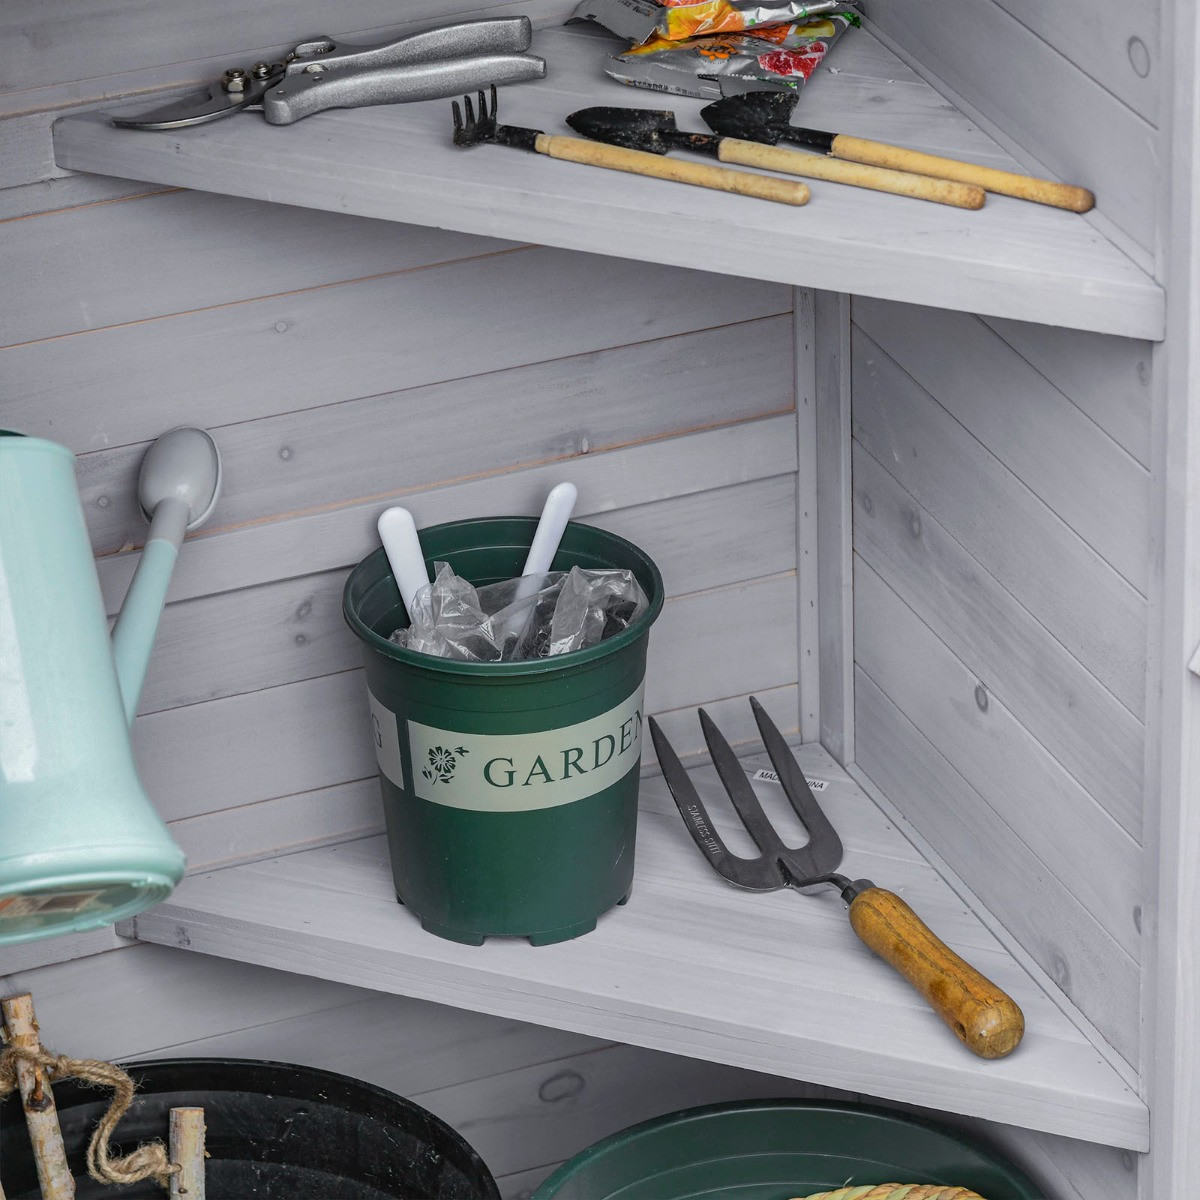 Outsunny Wooden Garden Storage Shed Cabinet, Grey - Tall>